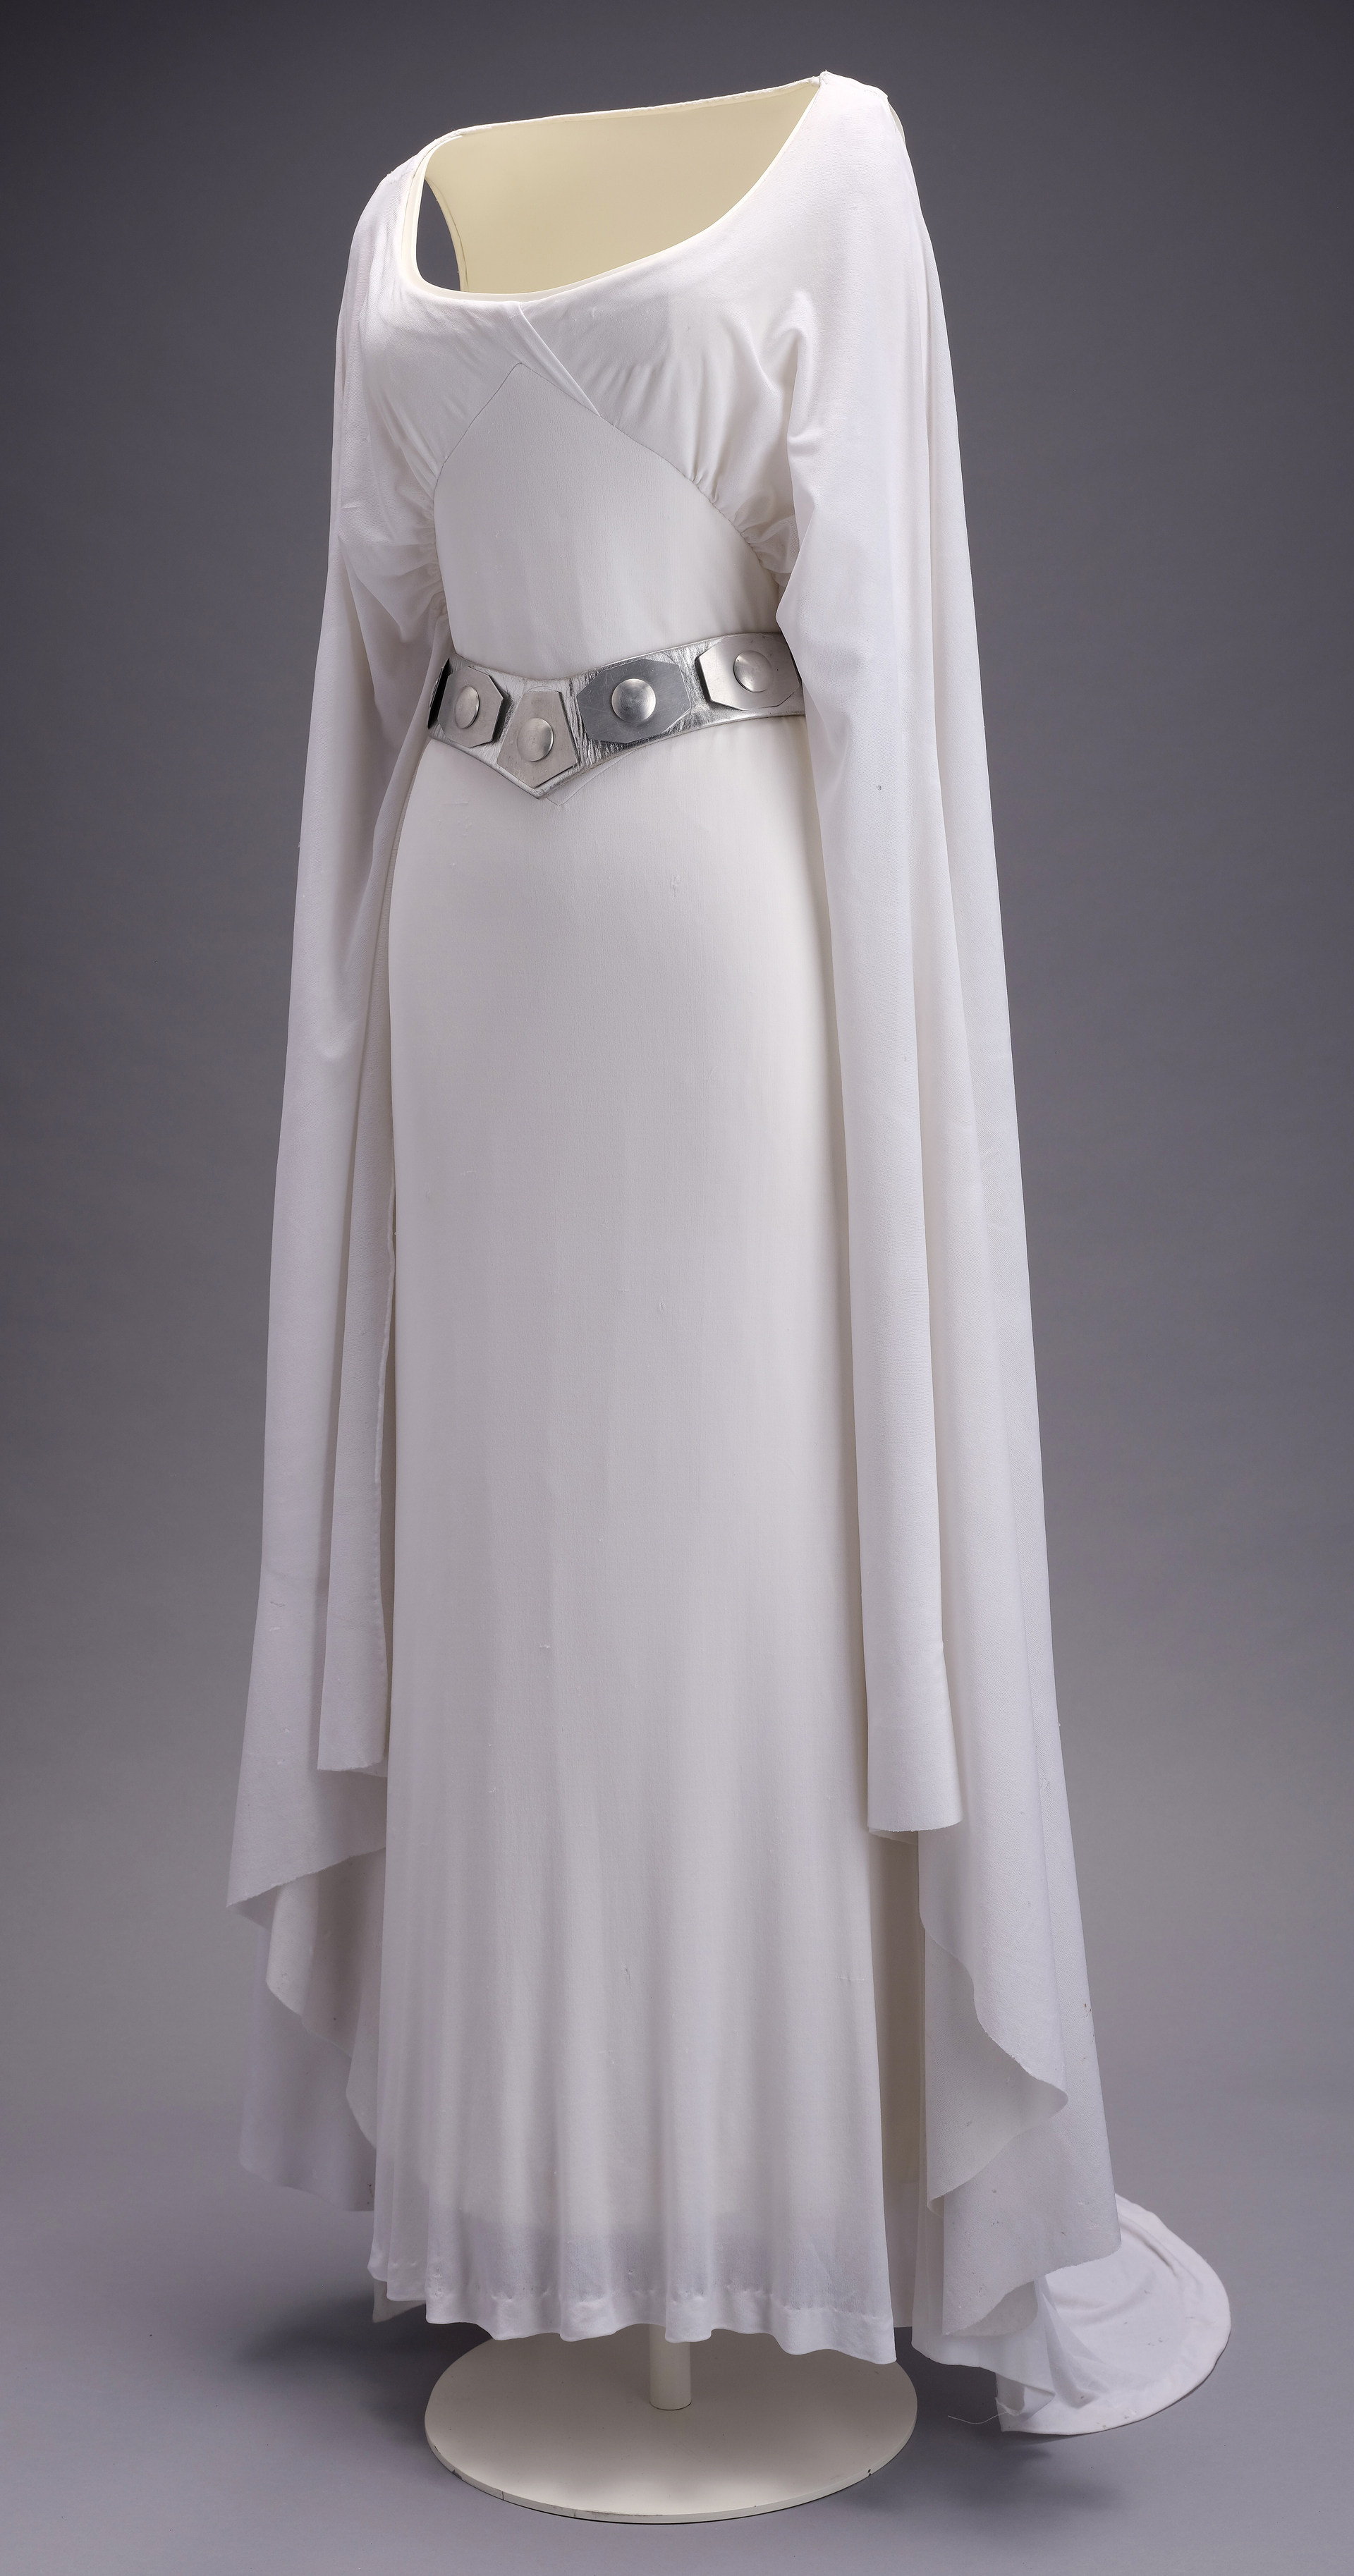 STAR WARS: A NEW HOPE (1977) - Princess Leia's (Carrie Fisher) Screen-Matched Ceremonial Dress - Image 10 of 39